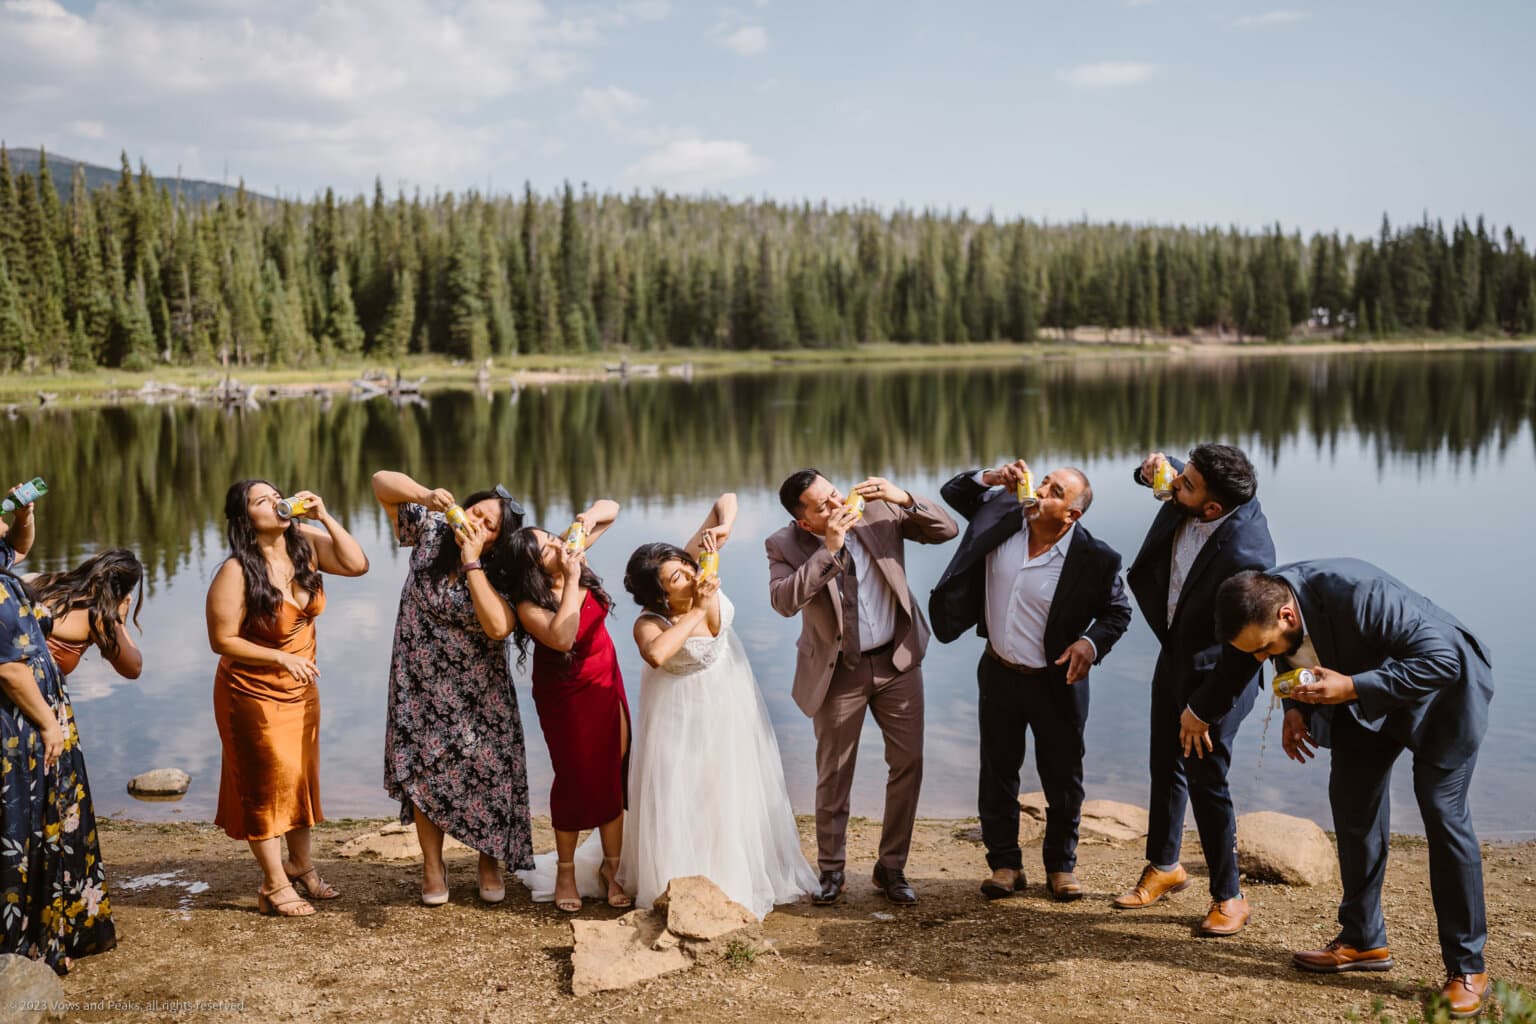 Couple shotgunning beers with their family for their elopement activity.